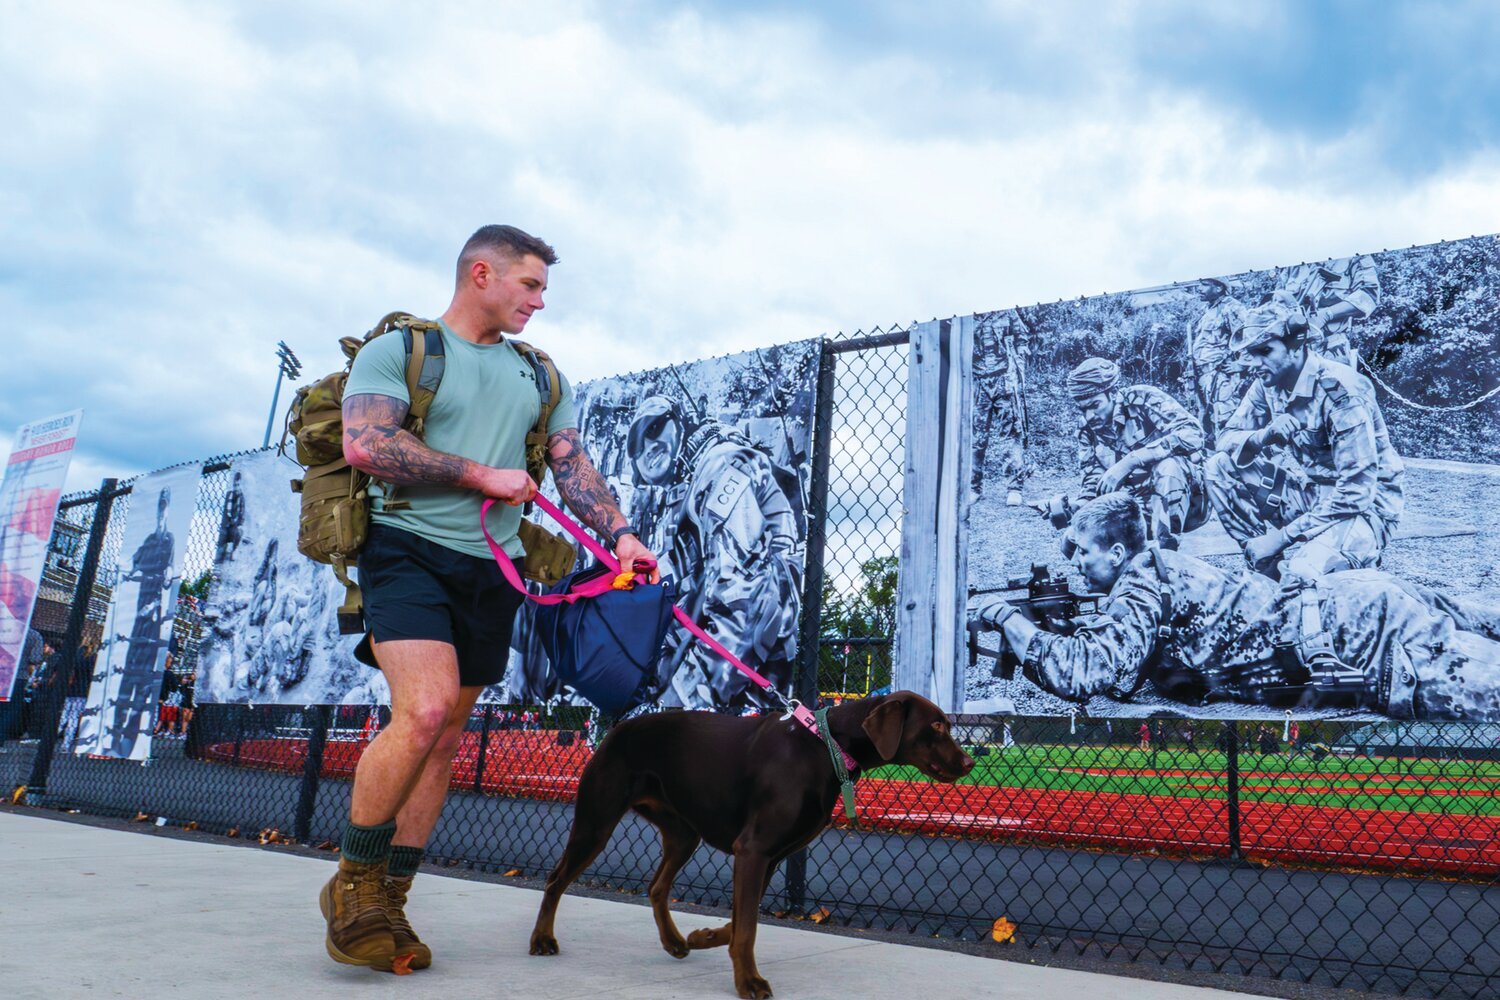 An attendee of the 9/11 Heroes Run Sunday at War Memorial Stadium at Central Bucks West High School walks past a collection of images depicting American troops.